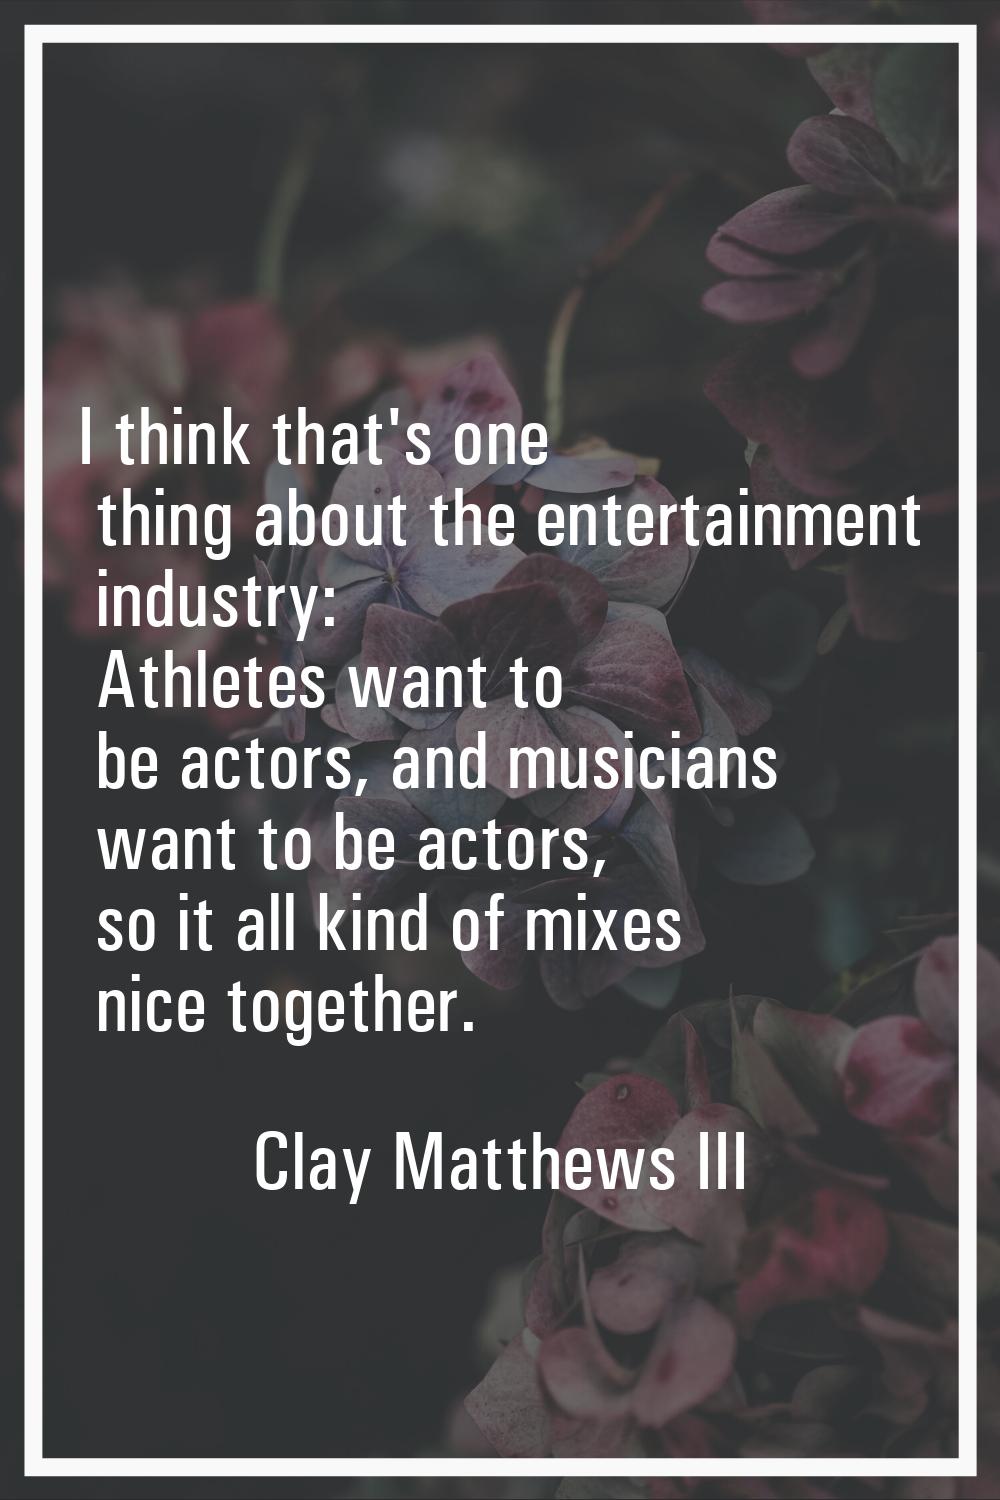 I think that's one thing about the entertainment industry: Athletes want to be actors, and musician